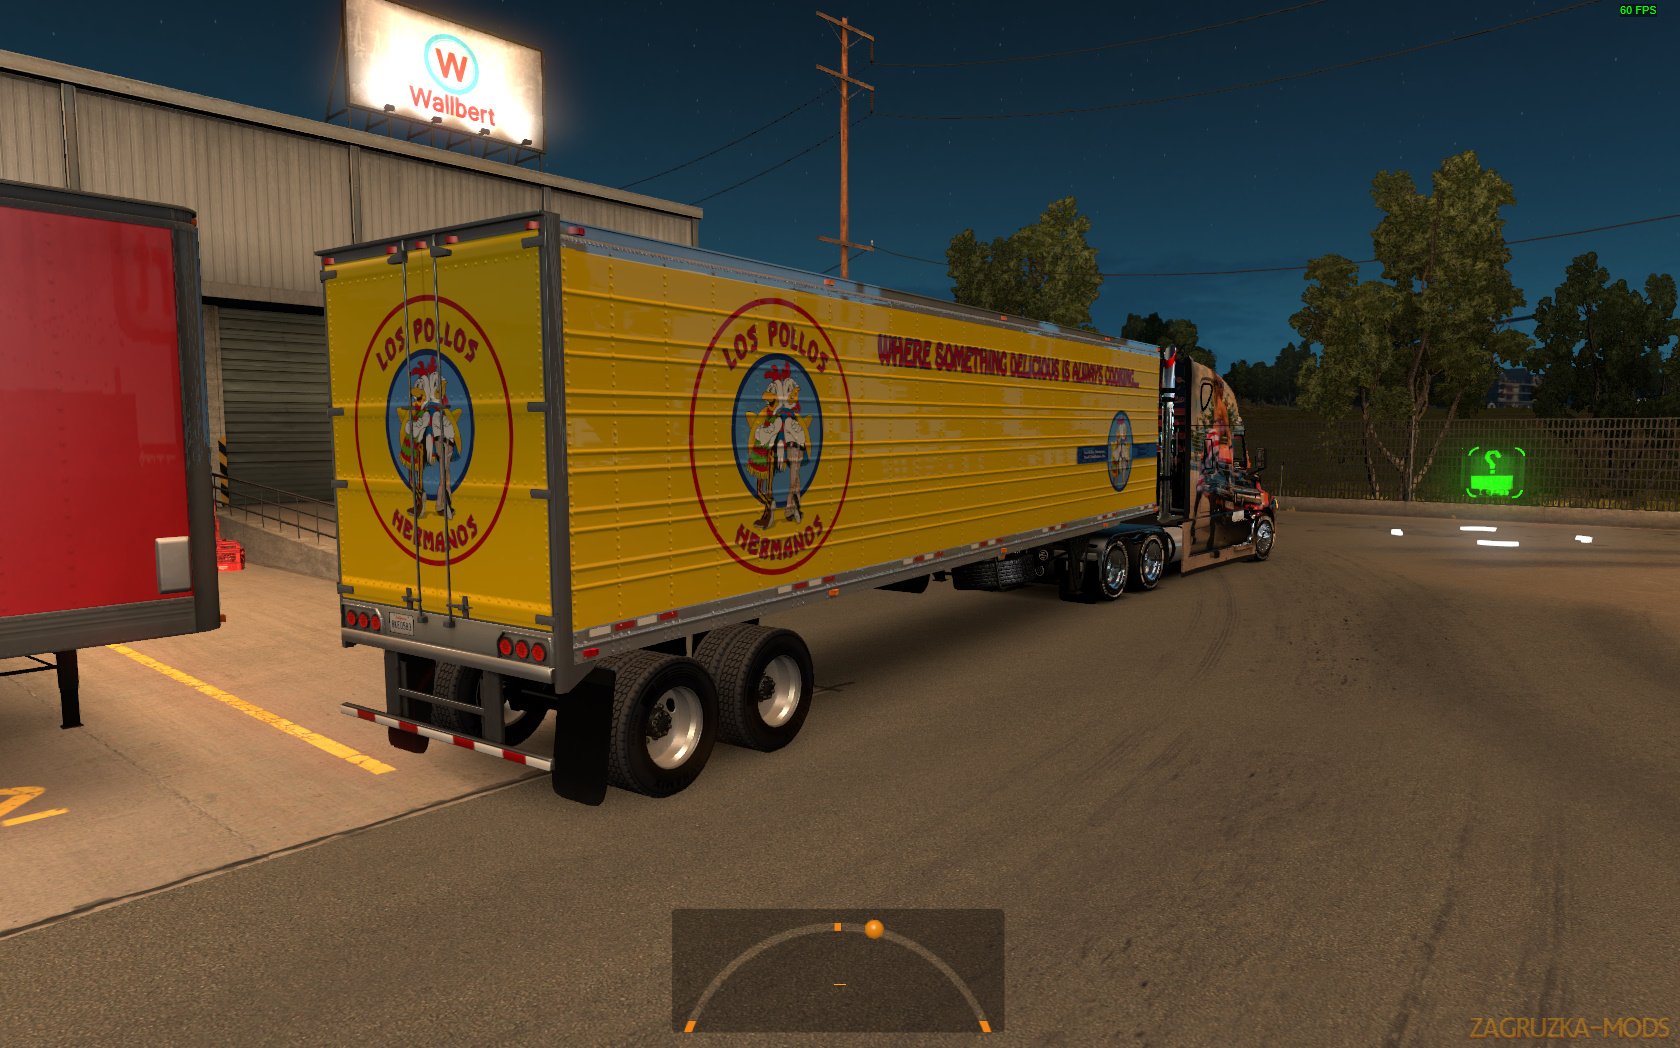 Los Pollos Hermanos 579 Skin and Standalone Trailer for Ats